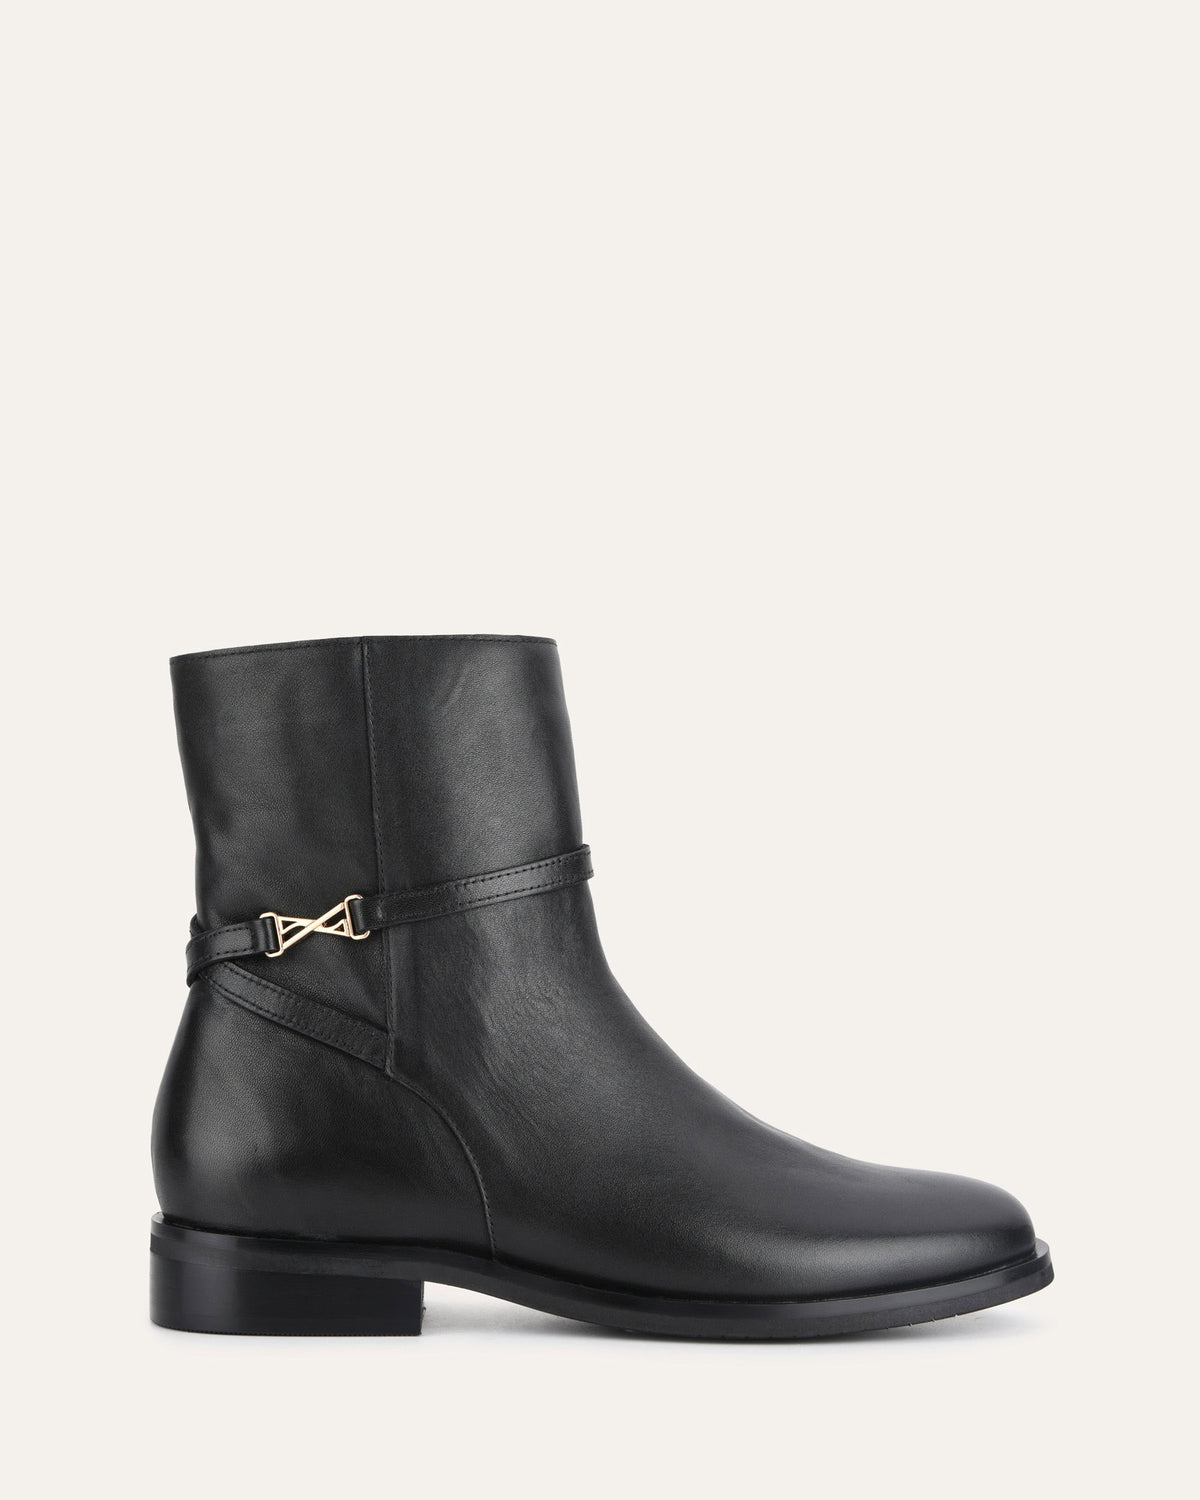 GILBERT FLAT ANKLE BOOTS BLACK LEATHER